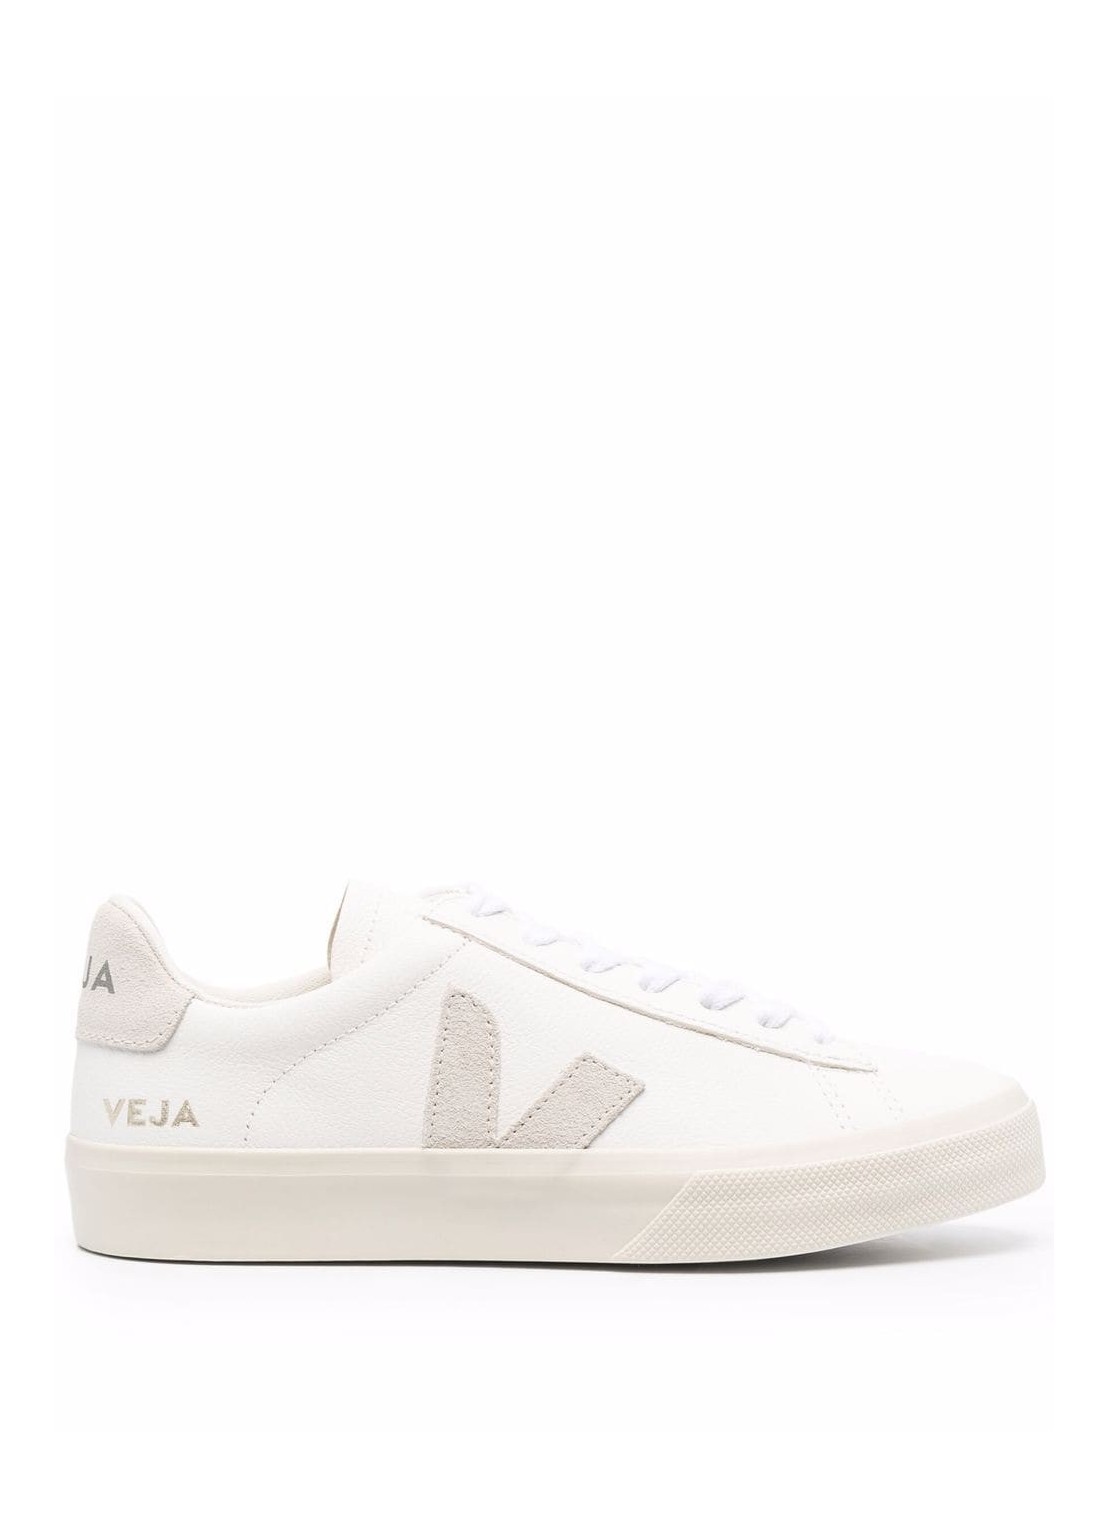 Sneaker veja sneaker man man campo chromefree cp0502429 extra white natural suede talla 44
 